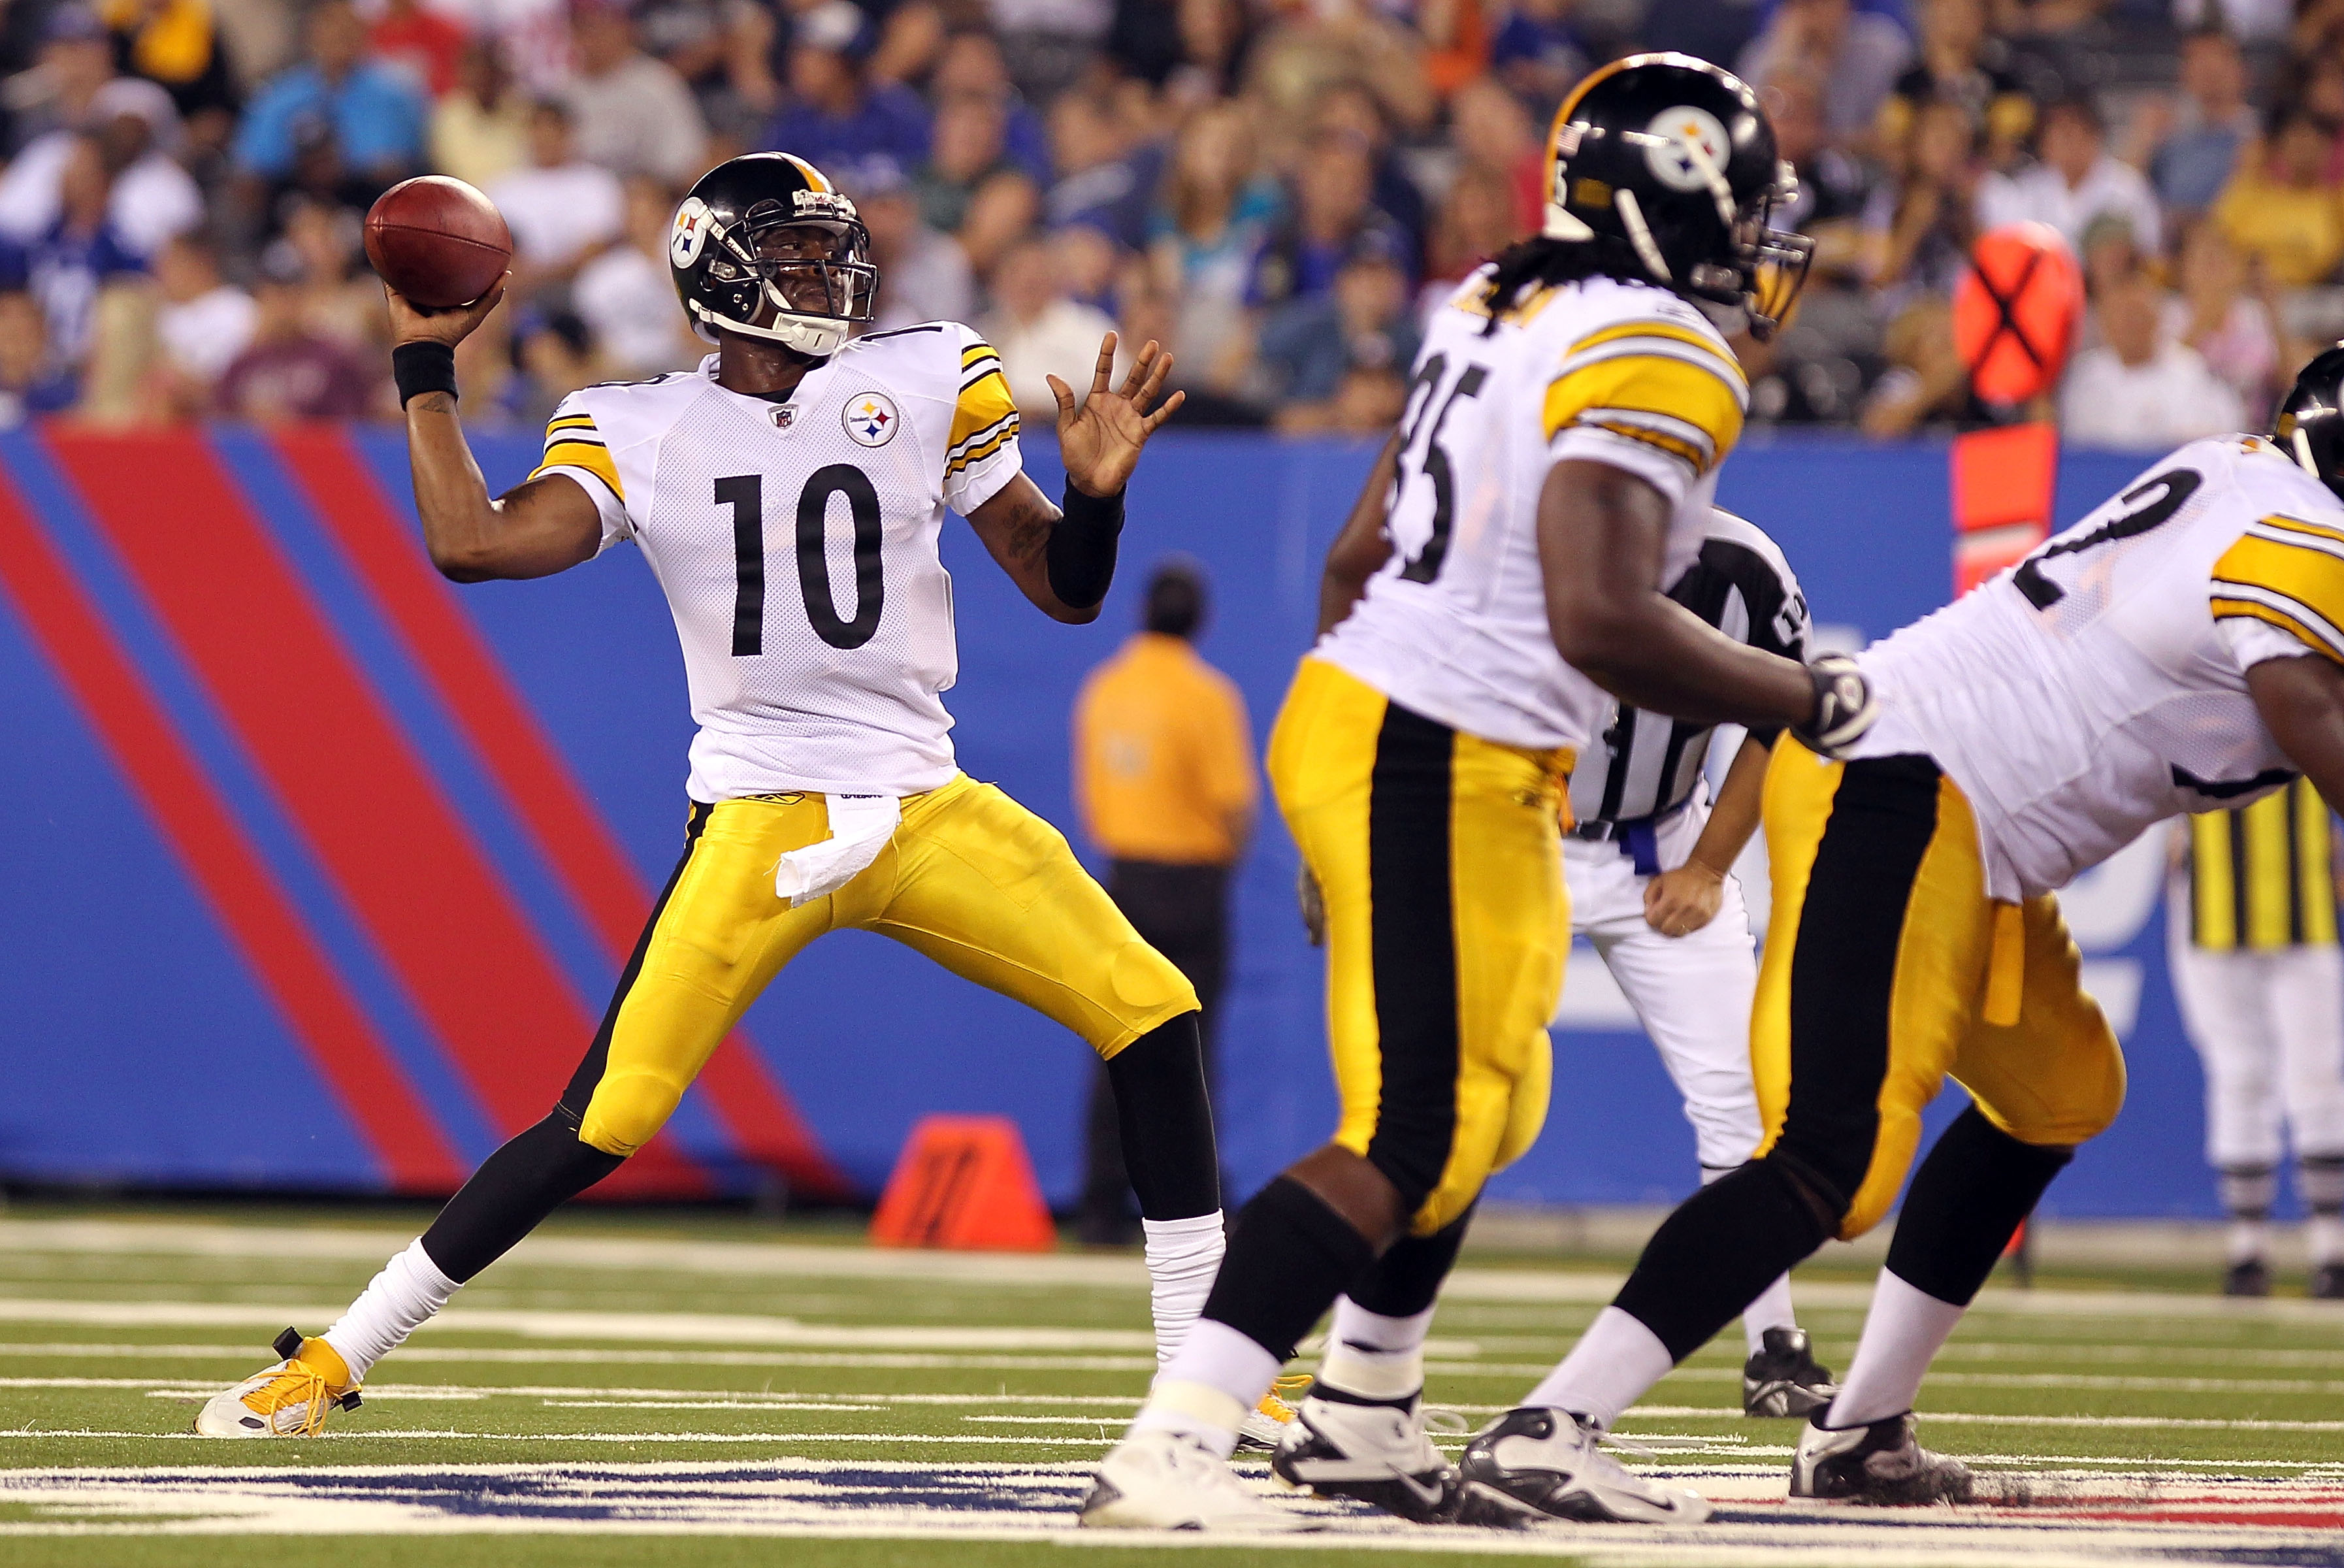 EAST RUTHERFORD, NJ - AUGUST 21:  Dennis Dixon #10 of the Pittsburgh Steelers drops back to pass against the New York Giants during their preseason game at New Meadowlands Stadium on August 21, 2010 in East Rutherford, New Jersey.  (Photo by Nick Laham/Ge